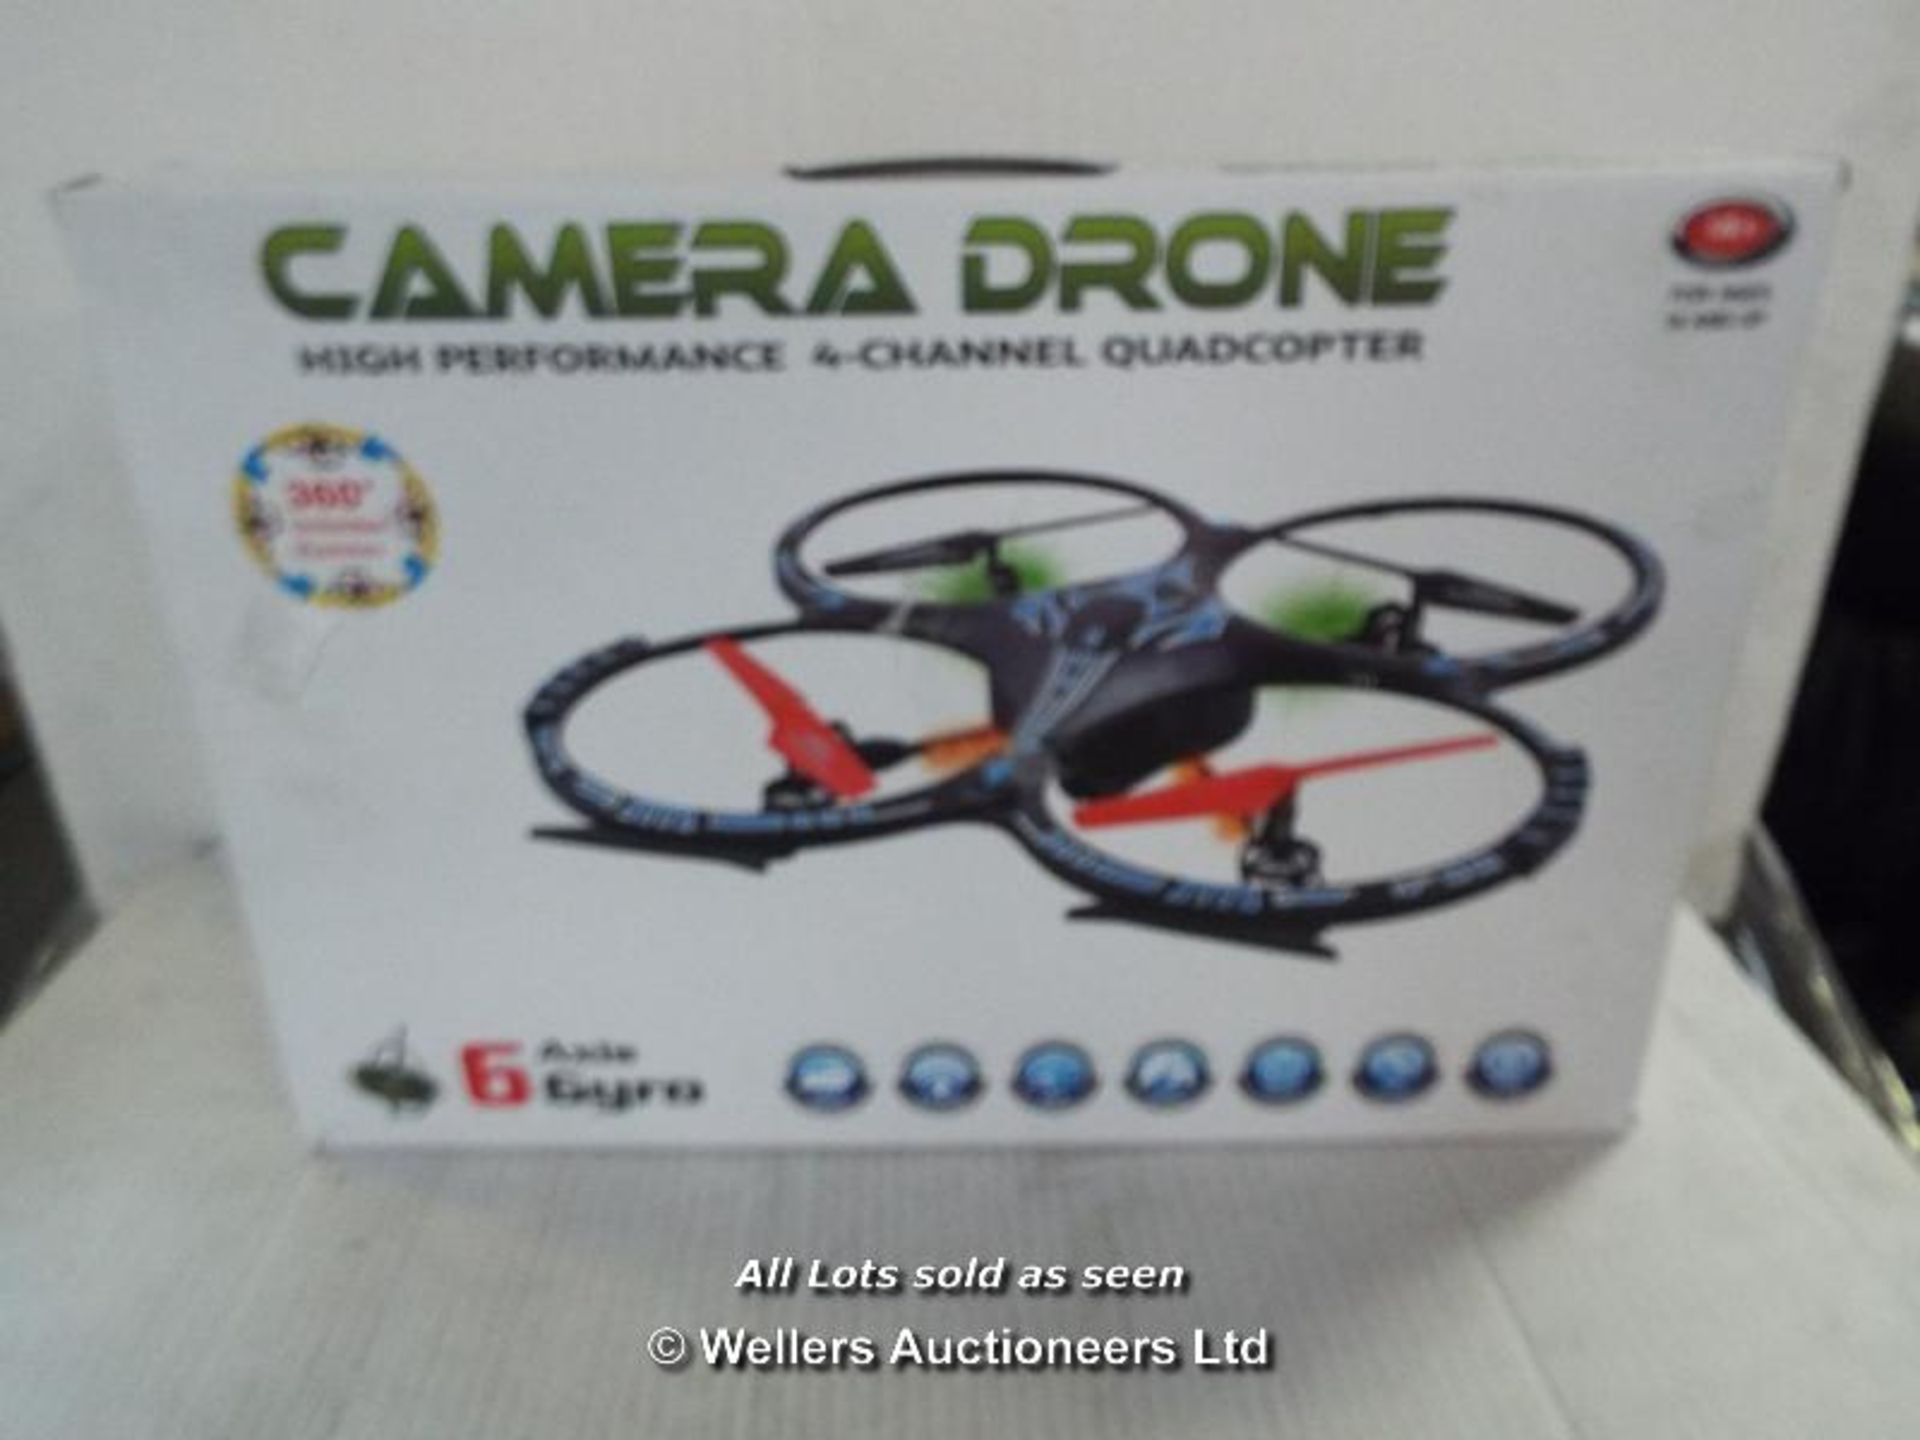 RC 2.4GHZ 4CH 6 AXIS GYRO QUADCOPTER WITH CAMERA N43DS / GRADE: RETURNS / BOXED (DC3) [AISLE 19]